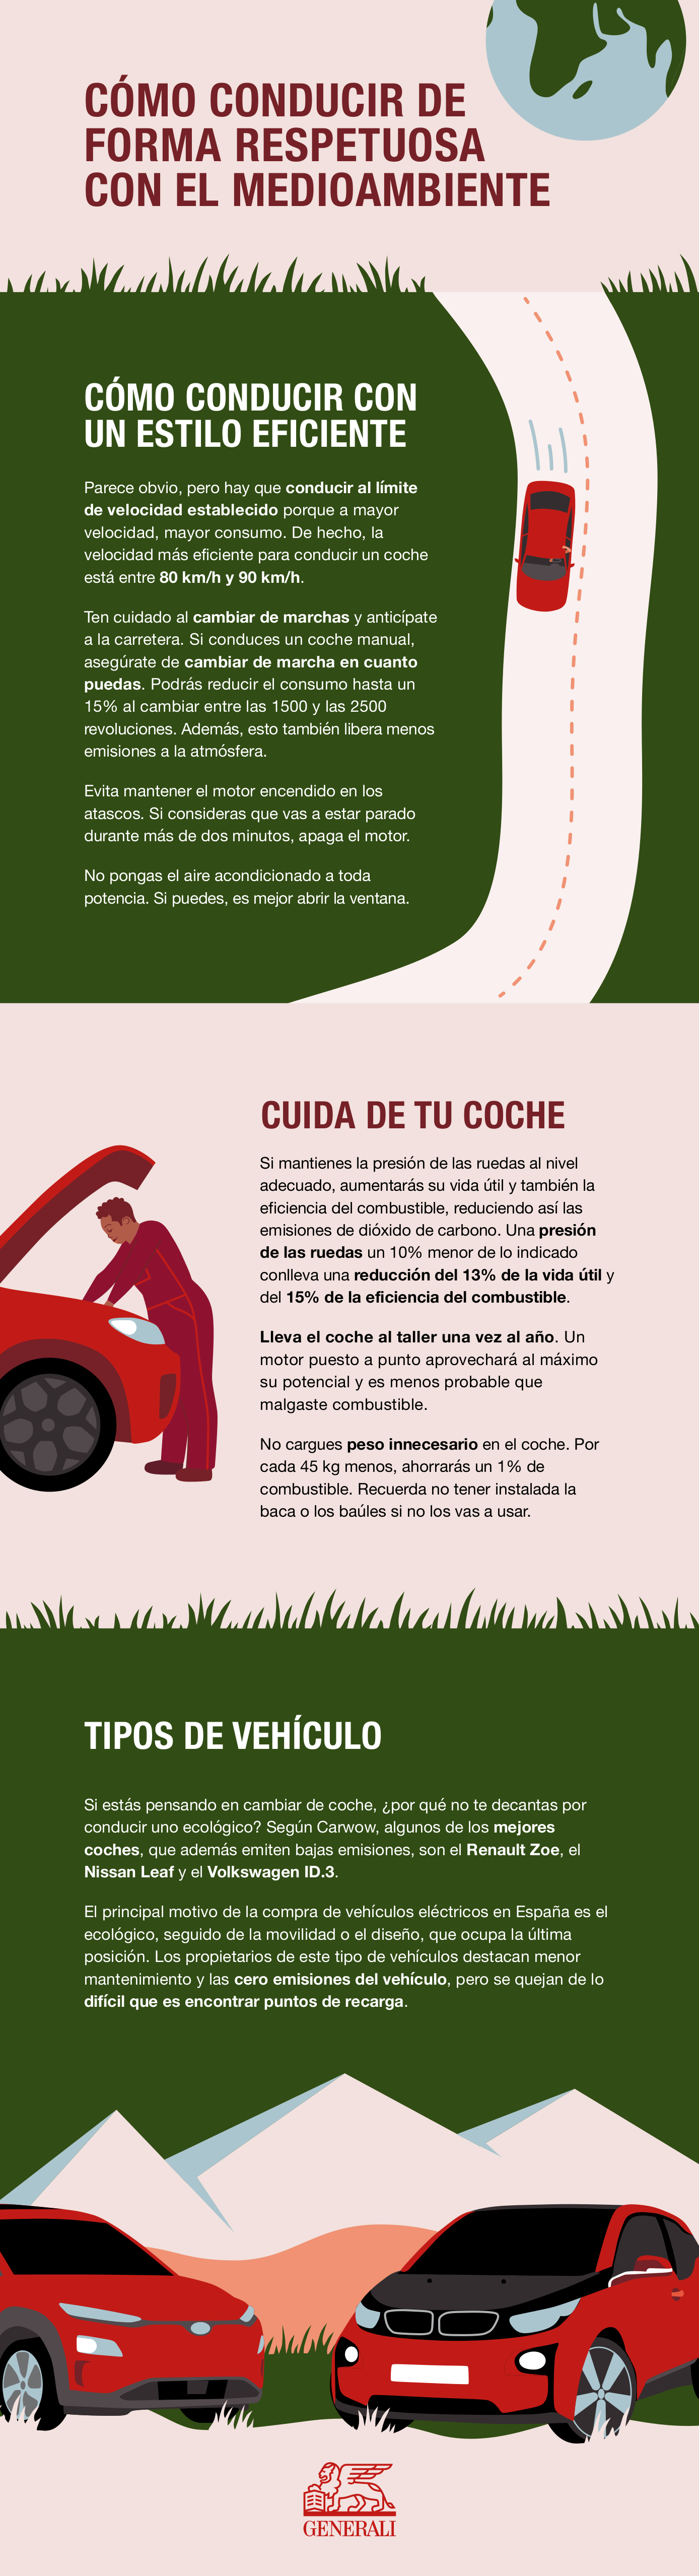 How to be a greener driver_infographic_05.07.21-Spain.png